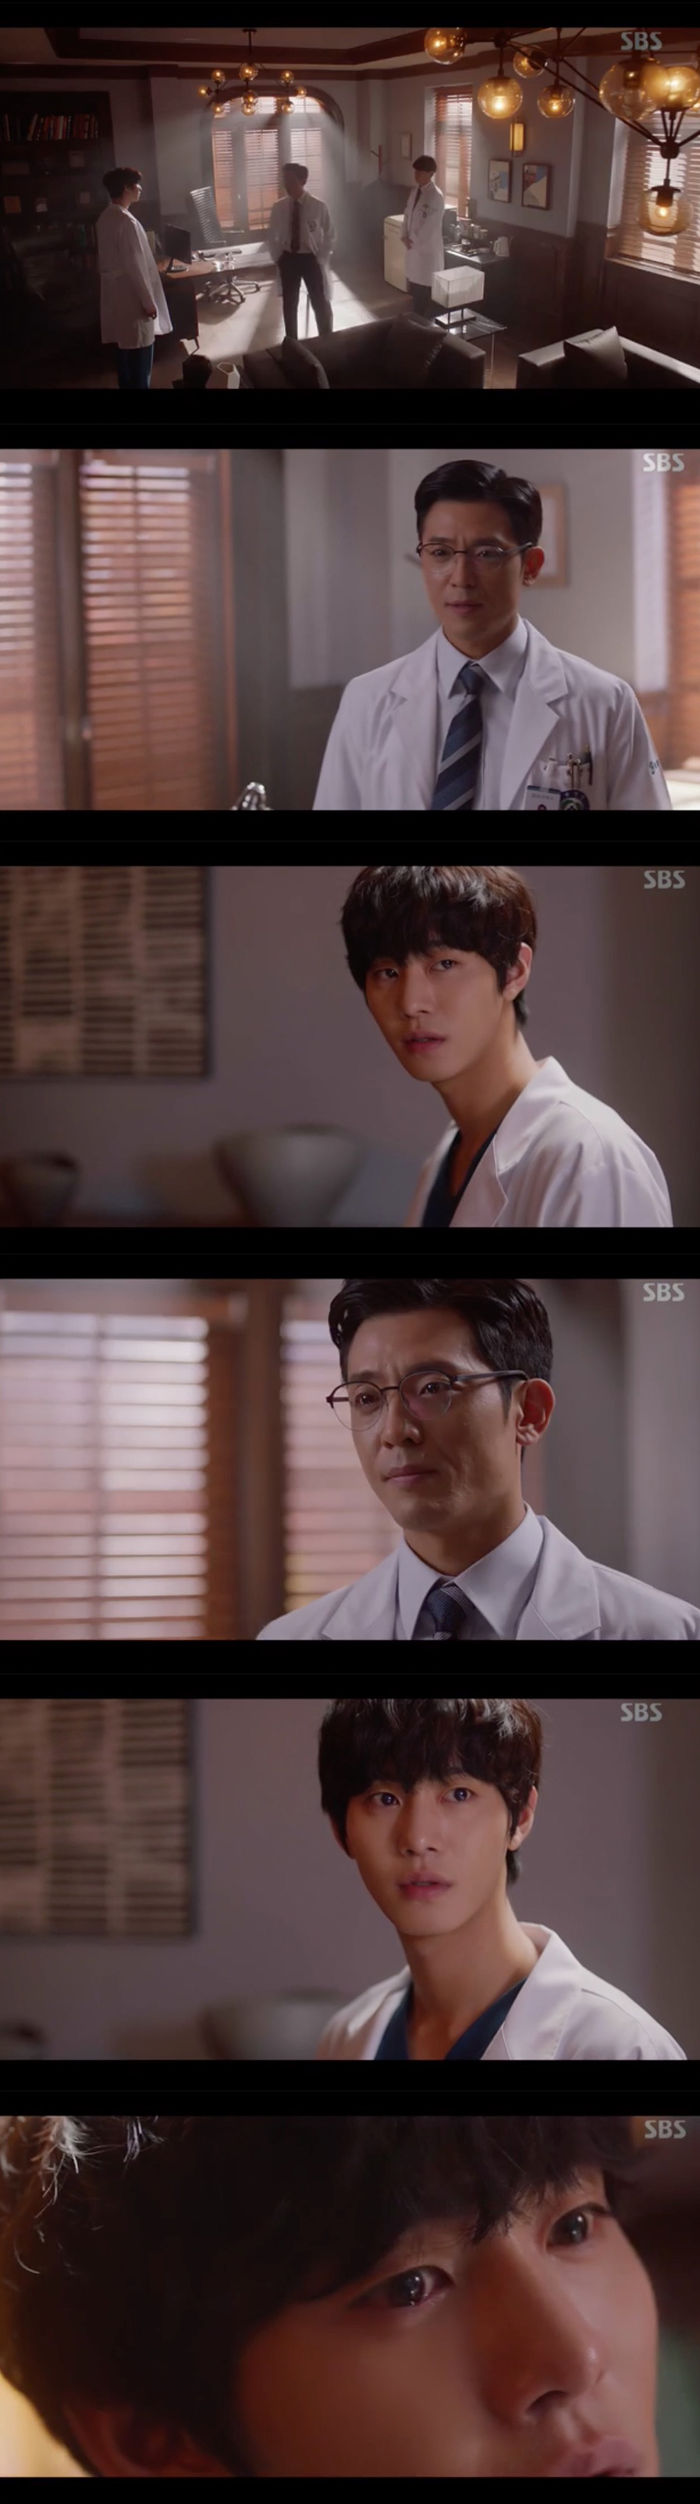 Would Ahn Hyo-seop accuse Lee Sung-kyung?On SBSs Romantic Doctor Kim Sabu 2 (hereinafter referred to as Kim Sabu 2) broadcast on the 10th, Park Min-guk (Kim Joo-heon) was shown trying to change the stone wall at his own discretion.On the same day, Park Min-guk dismissed Nam Do-il (by Byun Woo-min), and Nam Do-il kept quiet about this fact, fearing he might worry about himself.In addition, Park Min-guk put the nurses who were brought from the main office without the permission of Oh Myung-sim (Jin Kyung-min), a nurse.Heo Young-gyu (Bae Myung-jin), who was instructed by the director, said, It is the direction of the director.I know its unpleasant, but I will not interfere with the work of other teachers. I will only respond to the phone. Then a call came to Doldam Hospital, and the state job of the newly assigned nurses was revealed: it was their job to send back the emergency recall patients.So, Oh Myung-sim shouted, Where is the work that does not seem like this?Heo Young said, In the future, VIP patients will be busy with the surgical mask alone, but strategically reduce the number of emergency trauma patients.Look, our stone wall hospital never sends back injured and sick people, never spinning around the streets, never once in the past few years.But you are going to blow our hard work and identity in one shot. Heo Young said, It is not my decision, it is the directors decision, and even if I go up and put a complem, this decision will not change.Seo Woo Jin (Ahn Hyo-seop) noticed that the last of the surgical masks made a mistake.And Seo Woo Jin insisted that patients should be informed of this.Shim Hye-jin (Park Hyo-joo) said, Lets cover it up, there is no side effect on the patient, and if you shut up, it will pass quietly.You are the only traitor to be branded. Seo Woo Jin said, You do not have to worry about me.I will take care of my job. Park Min-guk also dried up Seo Woo Jin.Park Min-guk said, Do you think that doctors who should be in the hospital are called to the court, and they are dragged into the court when they have to see one more research paper, and that is really responsible?And he said, I have found out who the doctor is and I will contact him directly and warn him about this.I hope that the same doctors will save face and deal with the doctors authority in a way that does not collapse. But Seo Woo Jin did not turn his mind to the end. To him, Park Min-guk said, Do you know who the housekeeper is?I think I should know, he said. Lee Sung-kyung is a housekeeper. He confused Seo Woo Jin.